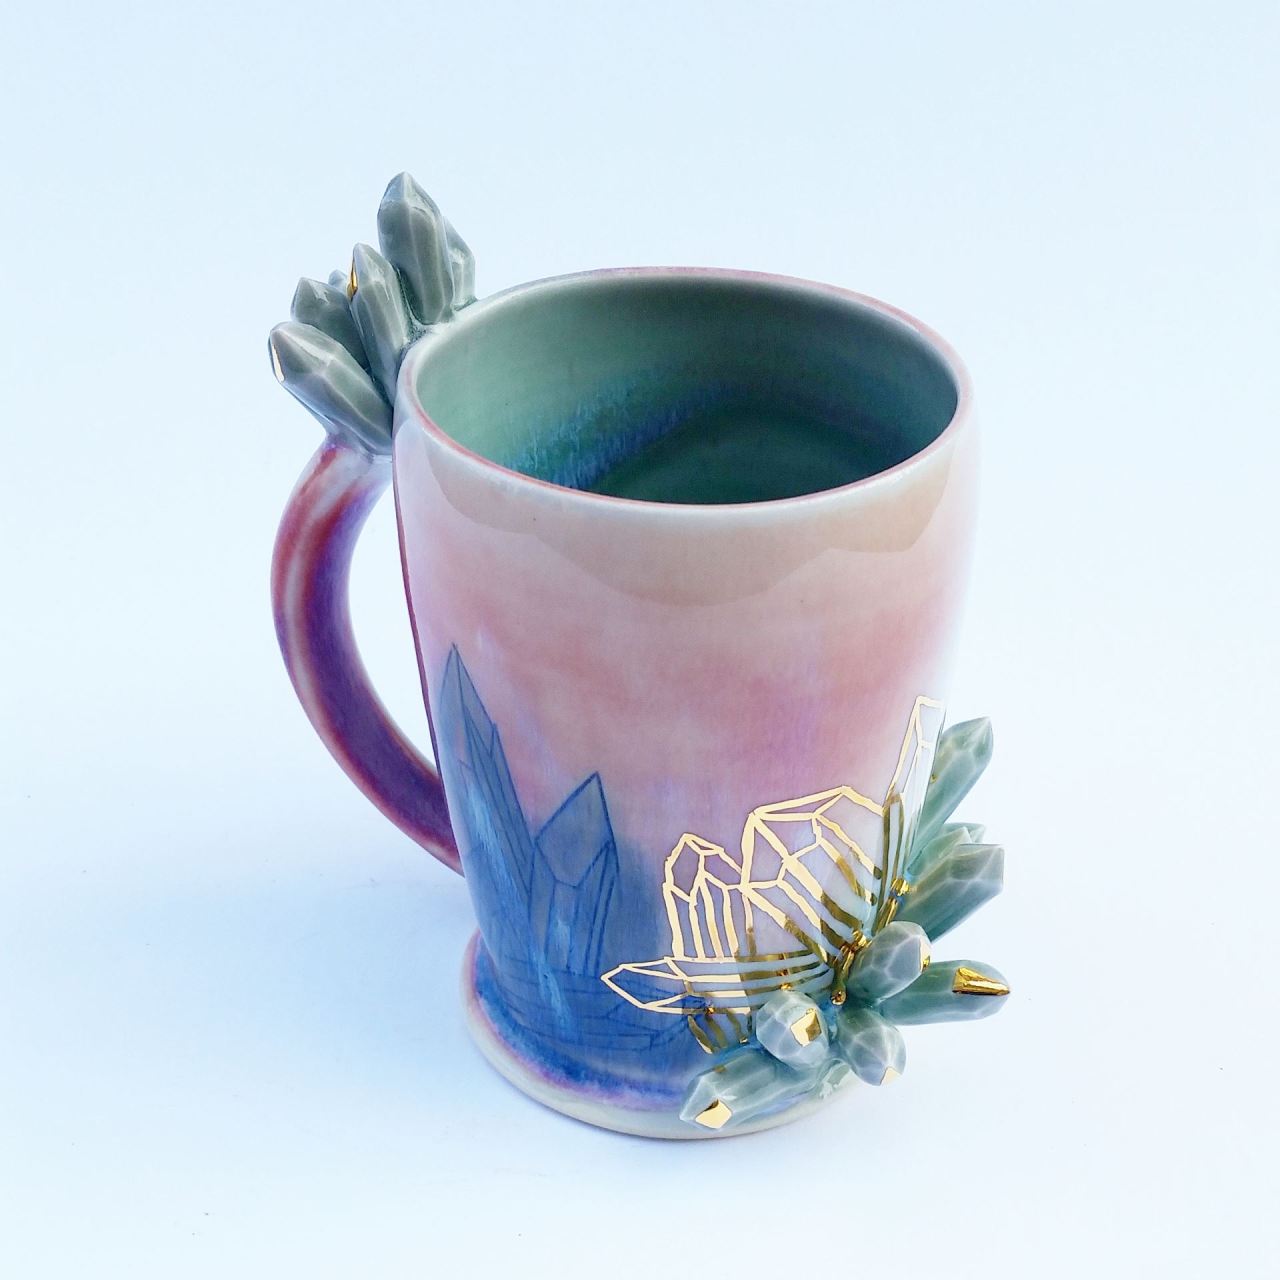 CULTURE N LIFESTYLE — Exquisite Ceramic Mugs Inspired by Crystals...